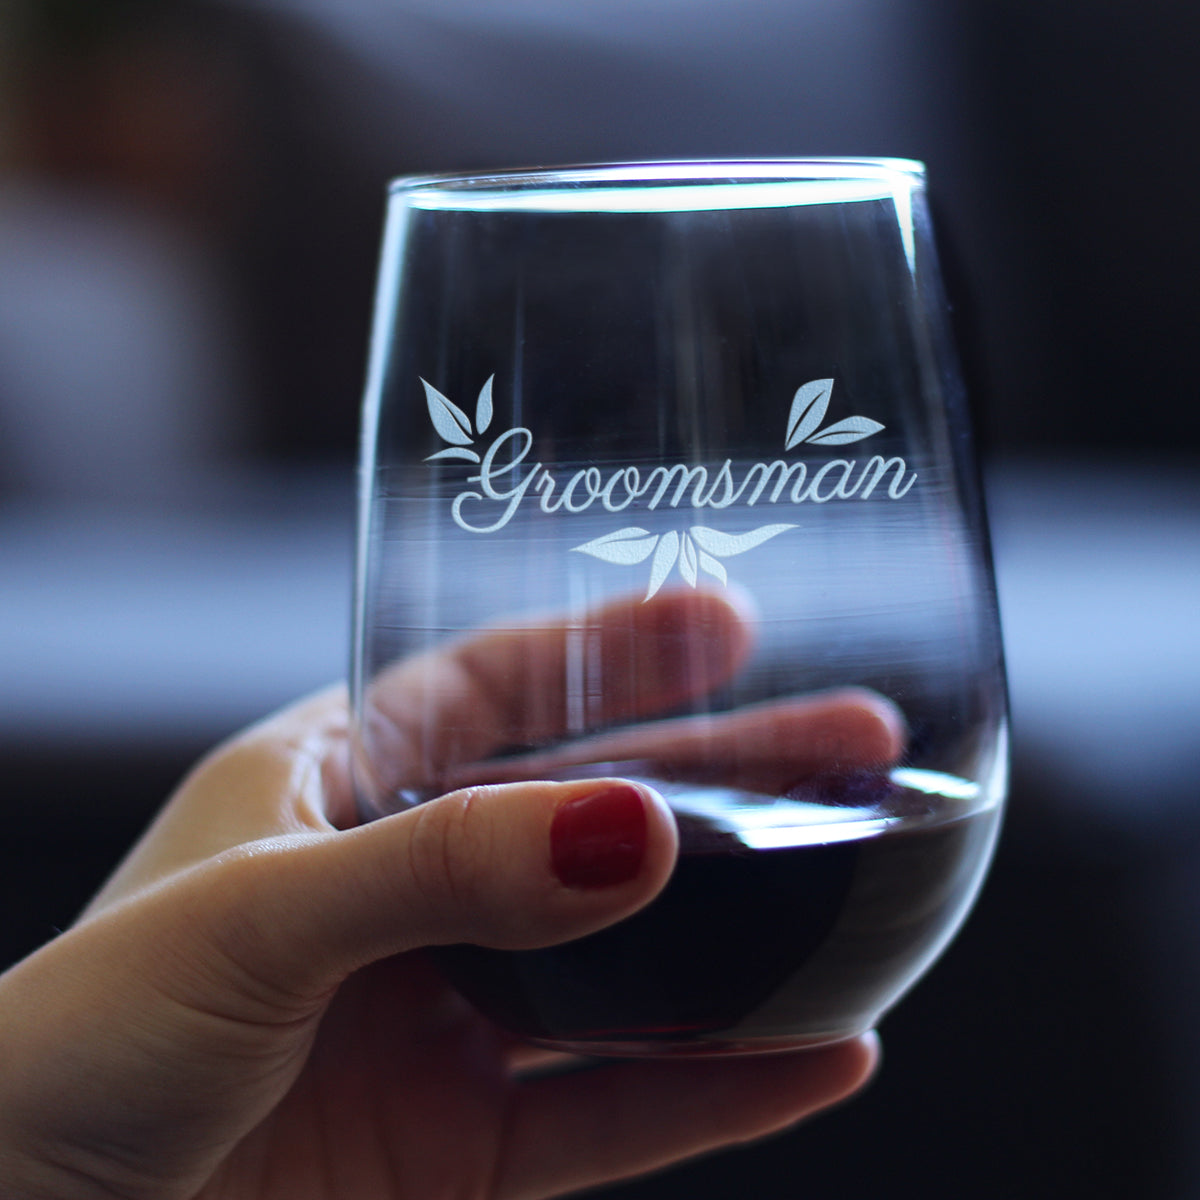 Groomsman Stemless Wine Glass - Groomsmen Proposal Gifts - Unique Engraved Wedding Cup Gift